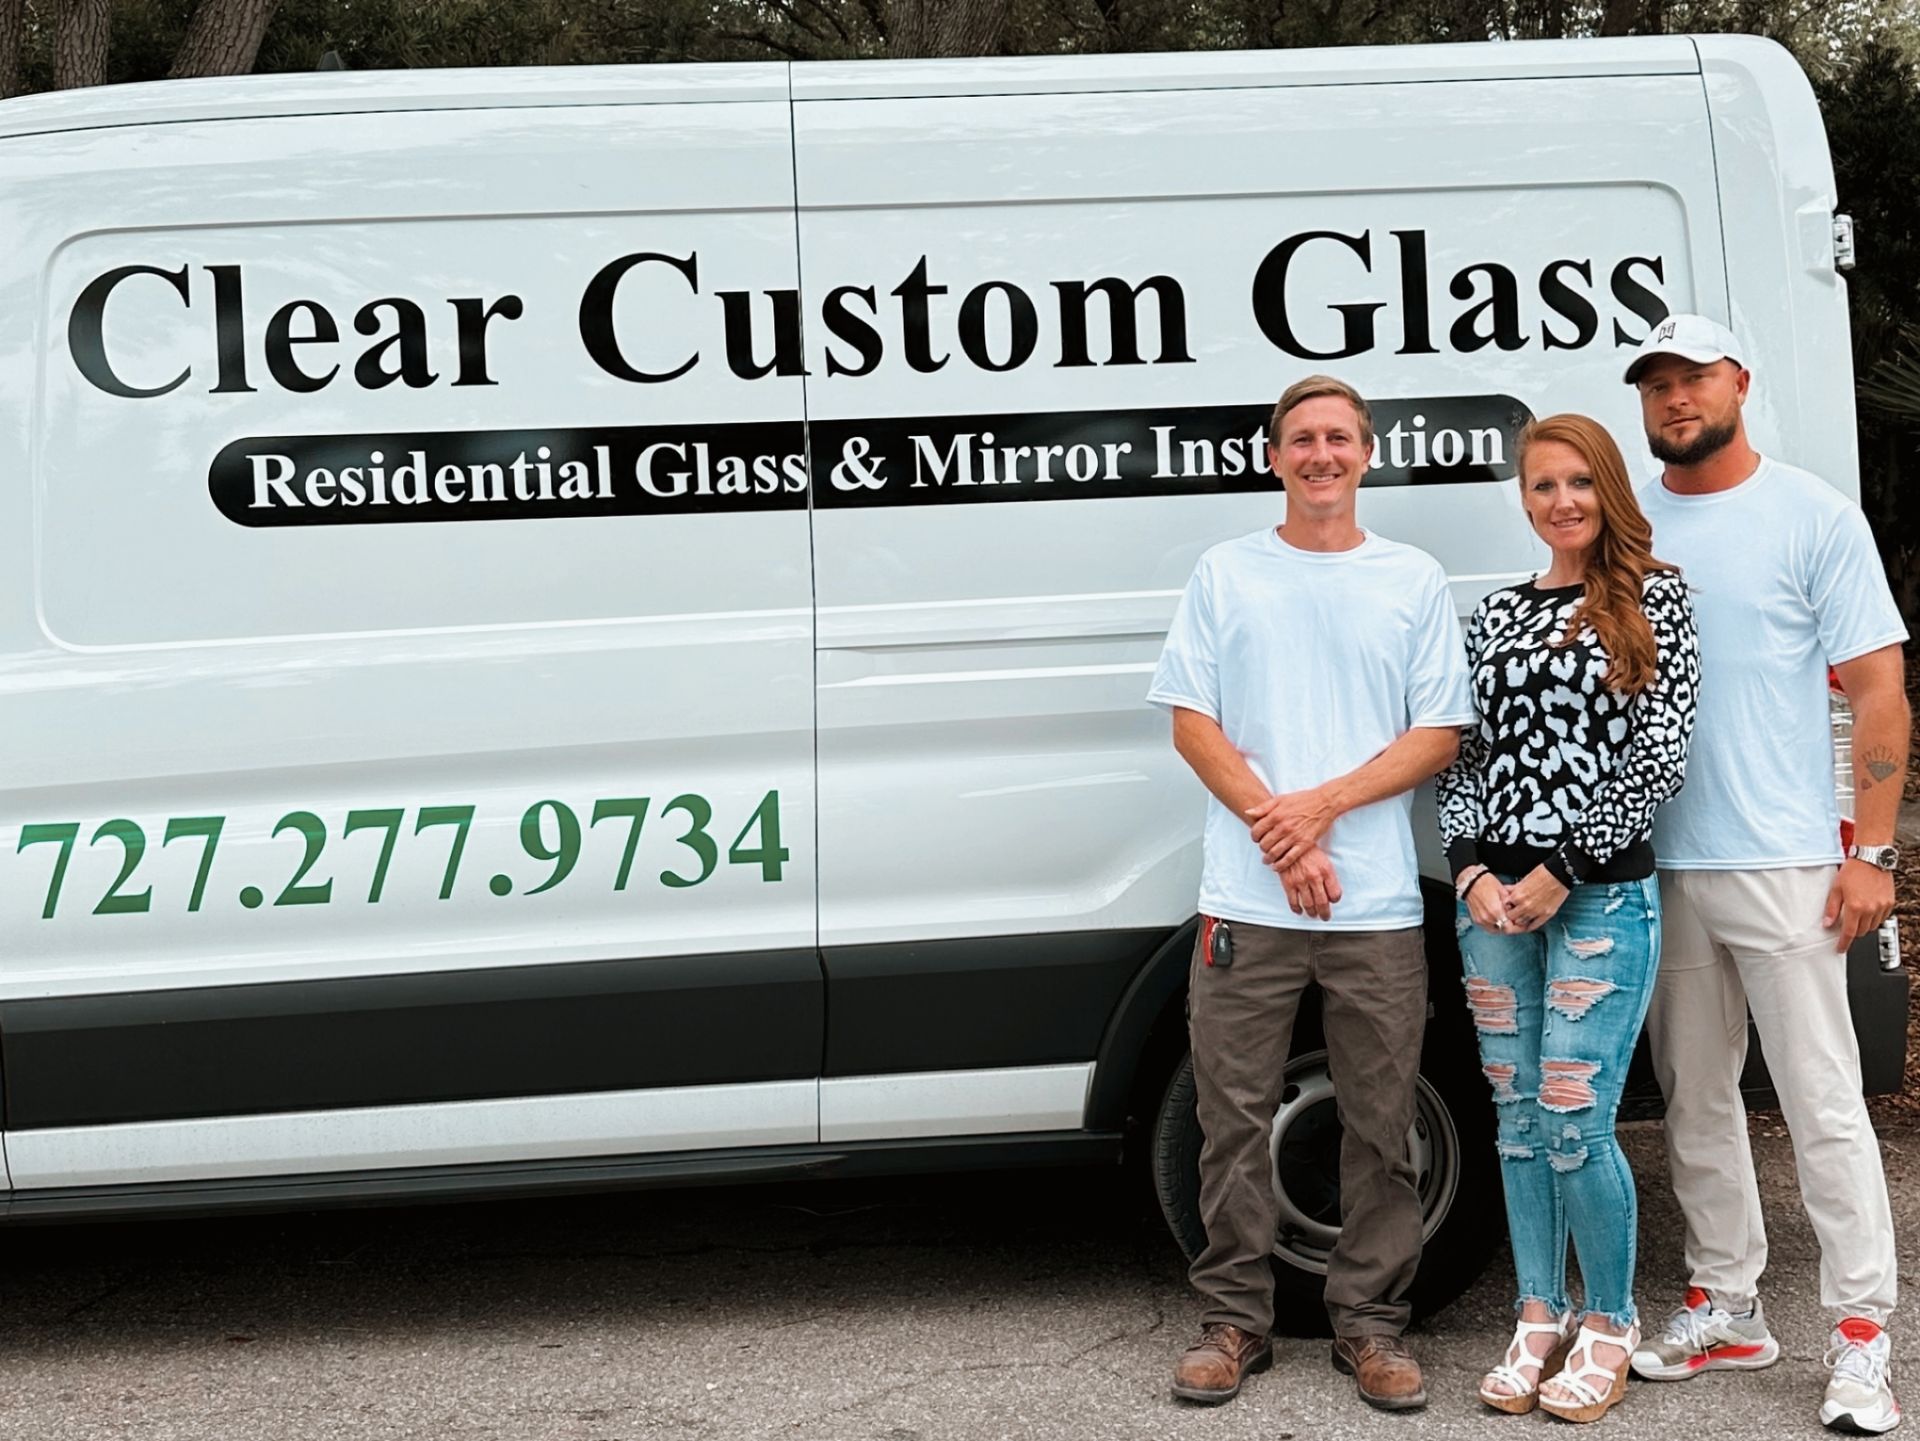 Clear Custom Glass owner and staff